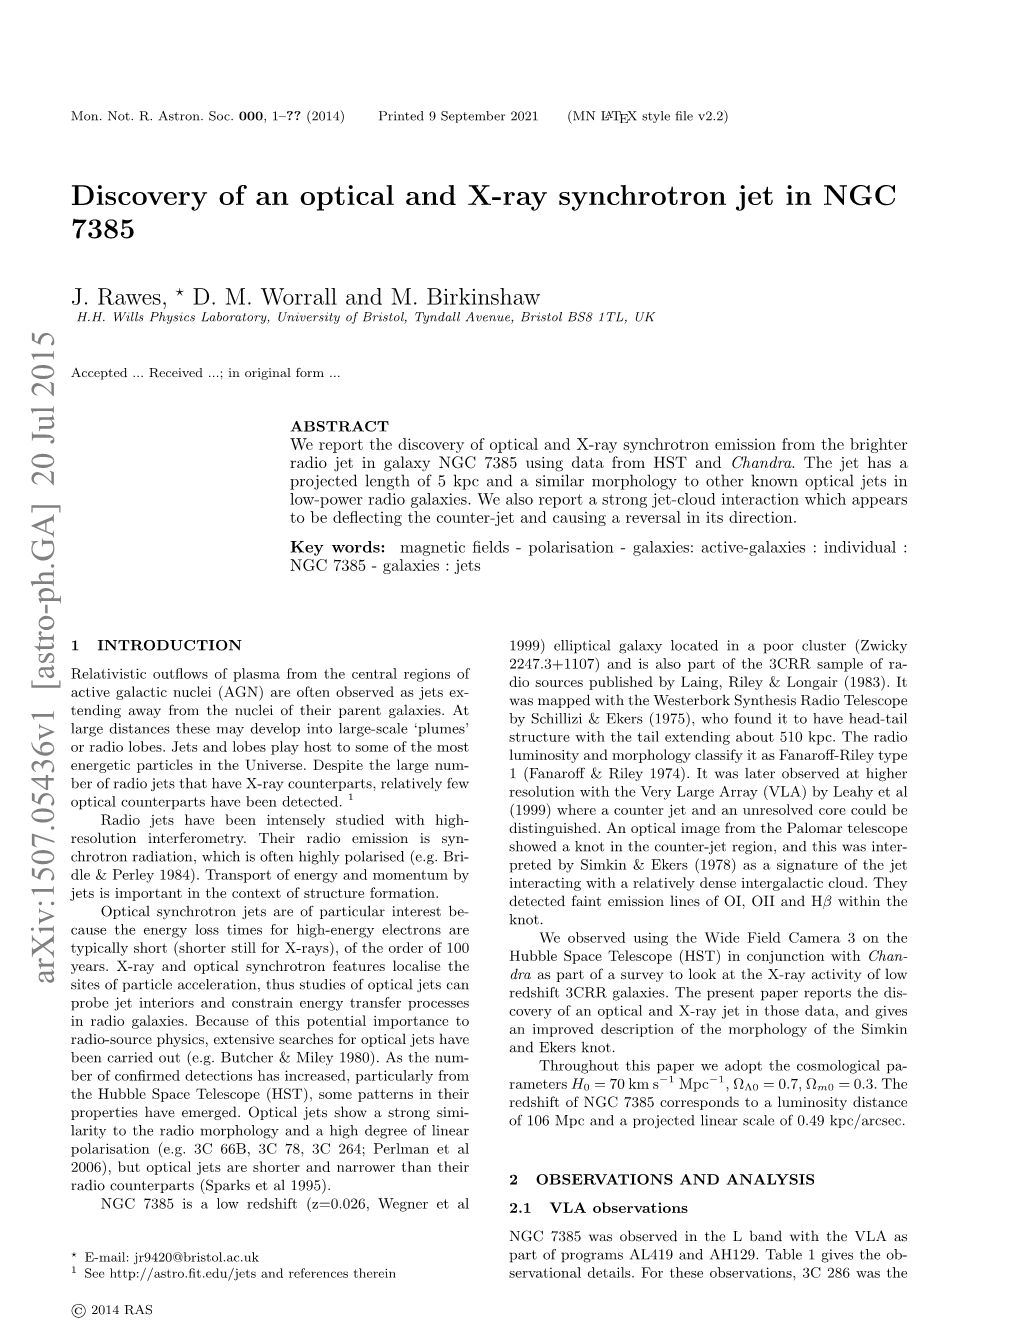 Discovery of an Optical and X-Ray Synchrotron Jet in NGC 7385